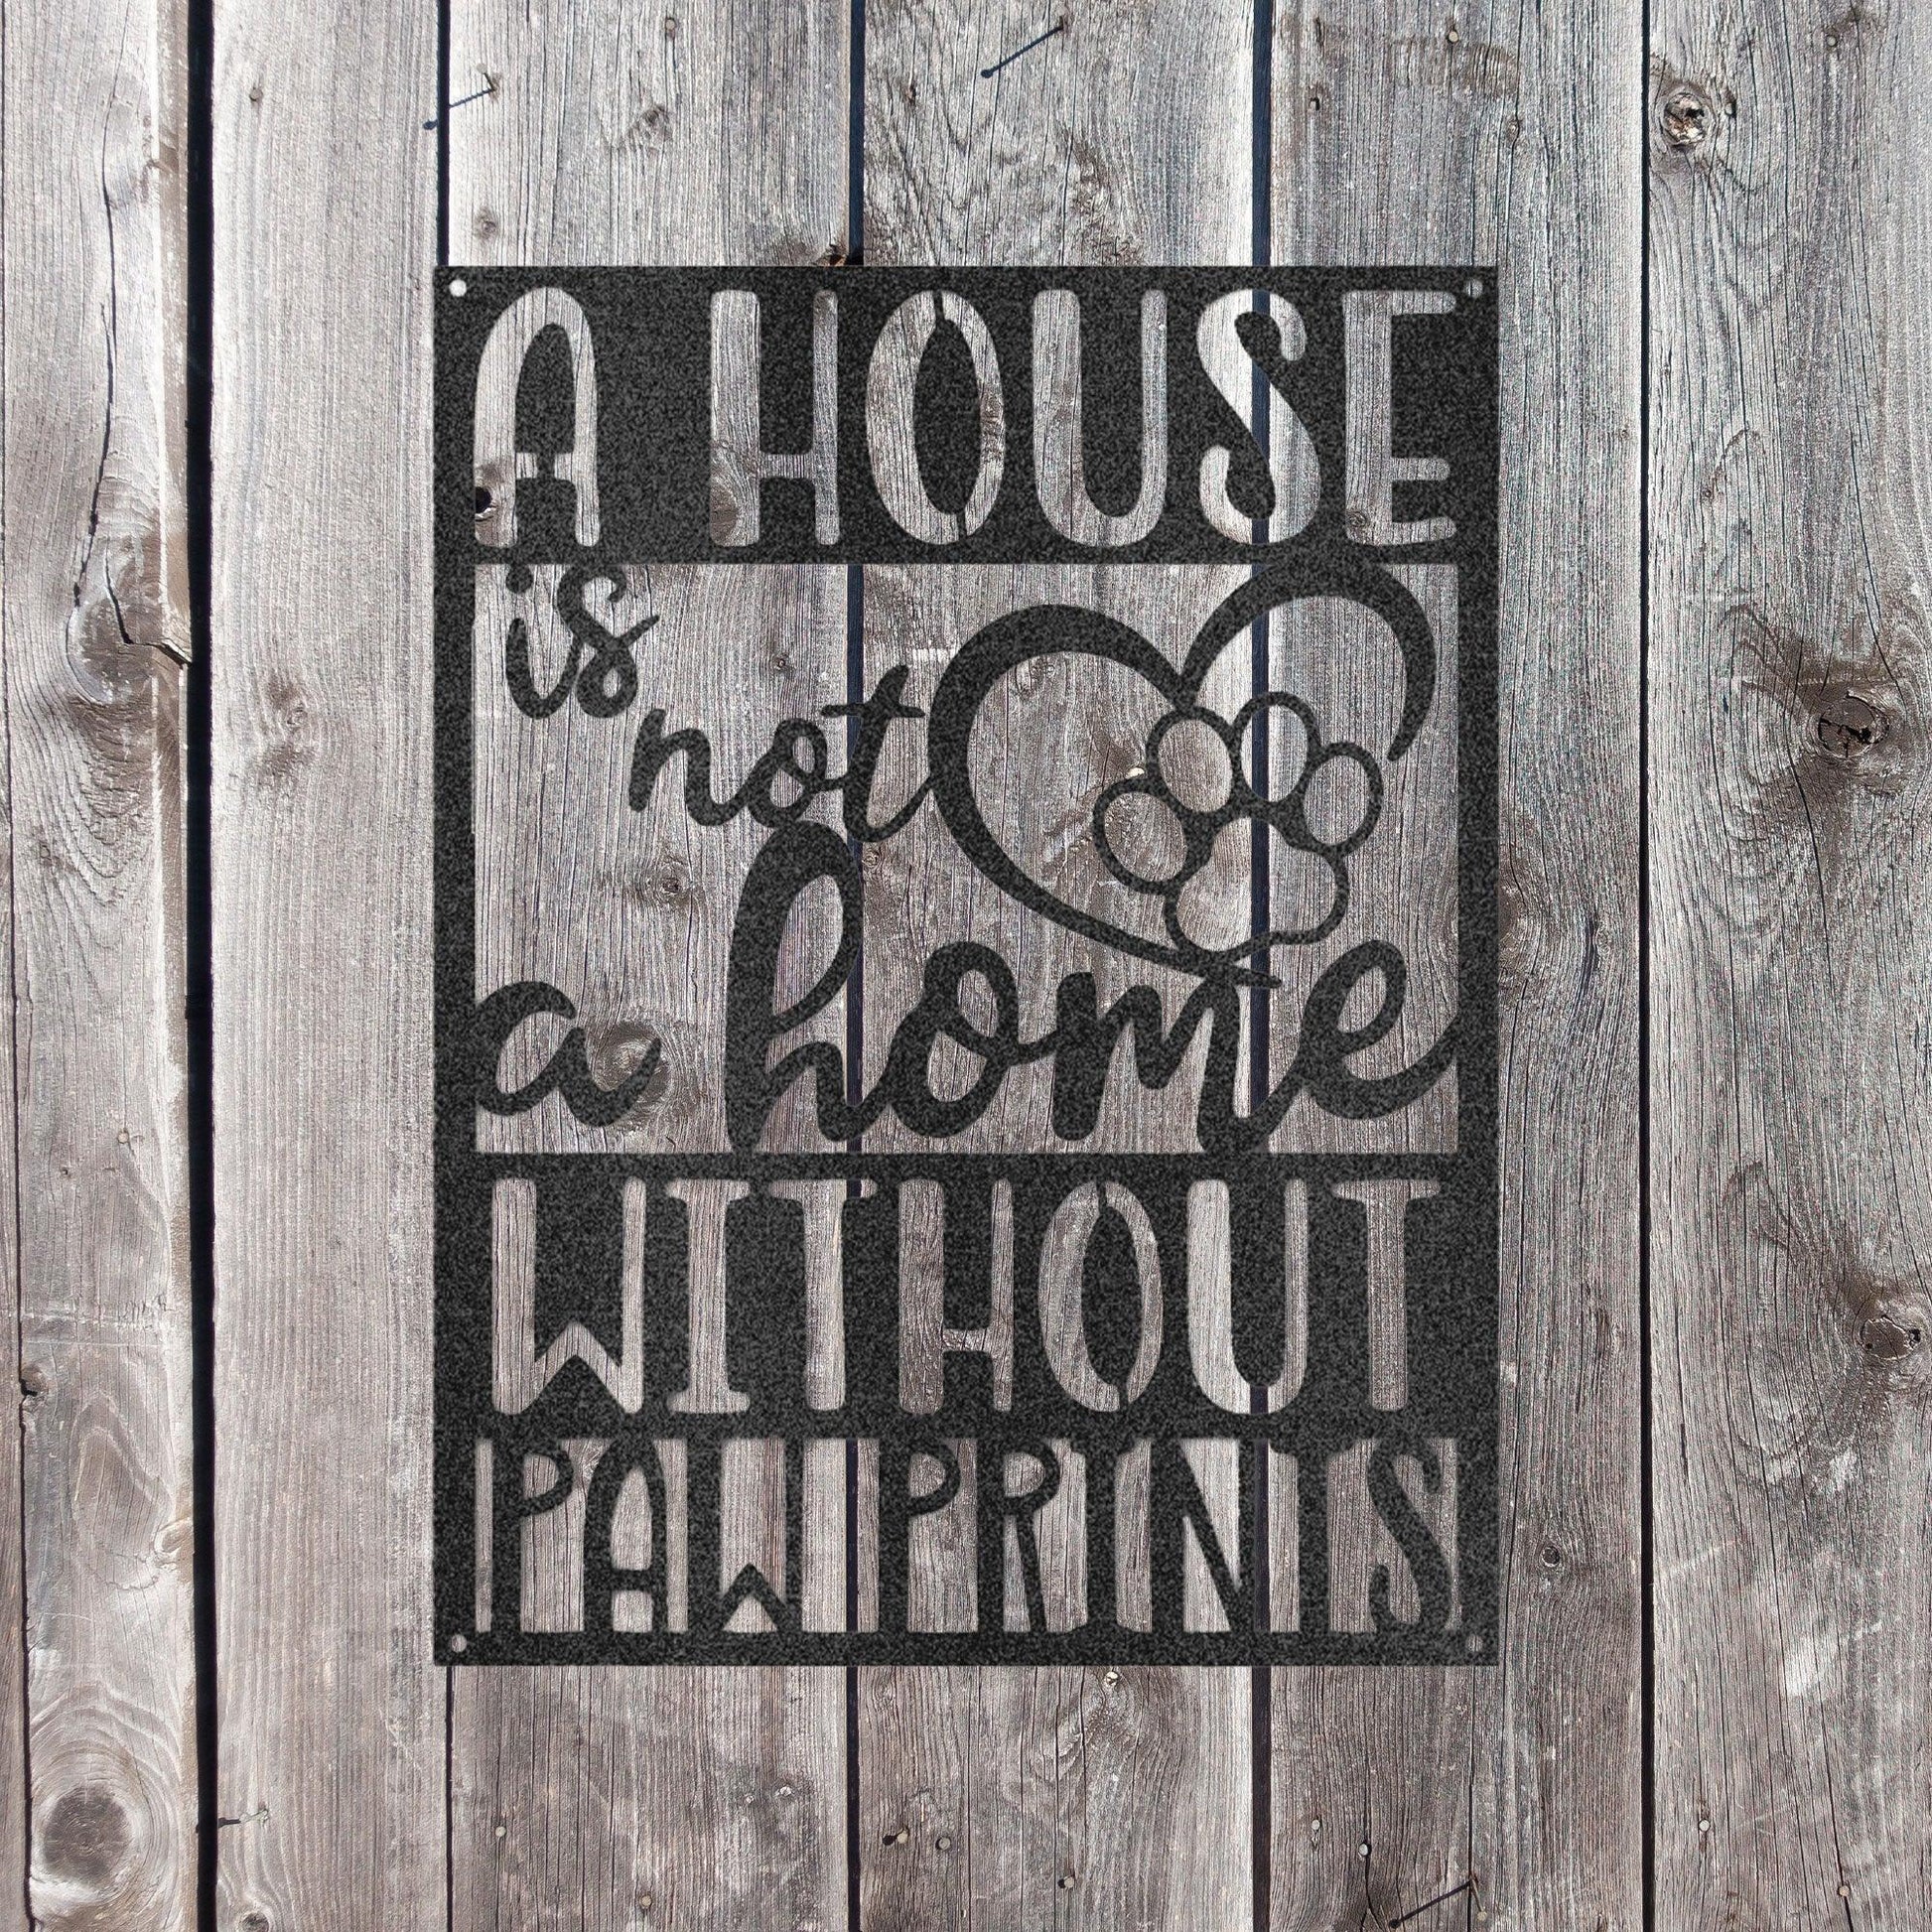 House is not a Home without Paw Prints Indoor Outdoor Steel Wall Sign Metal Art - Mallard Moon Gift Shop